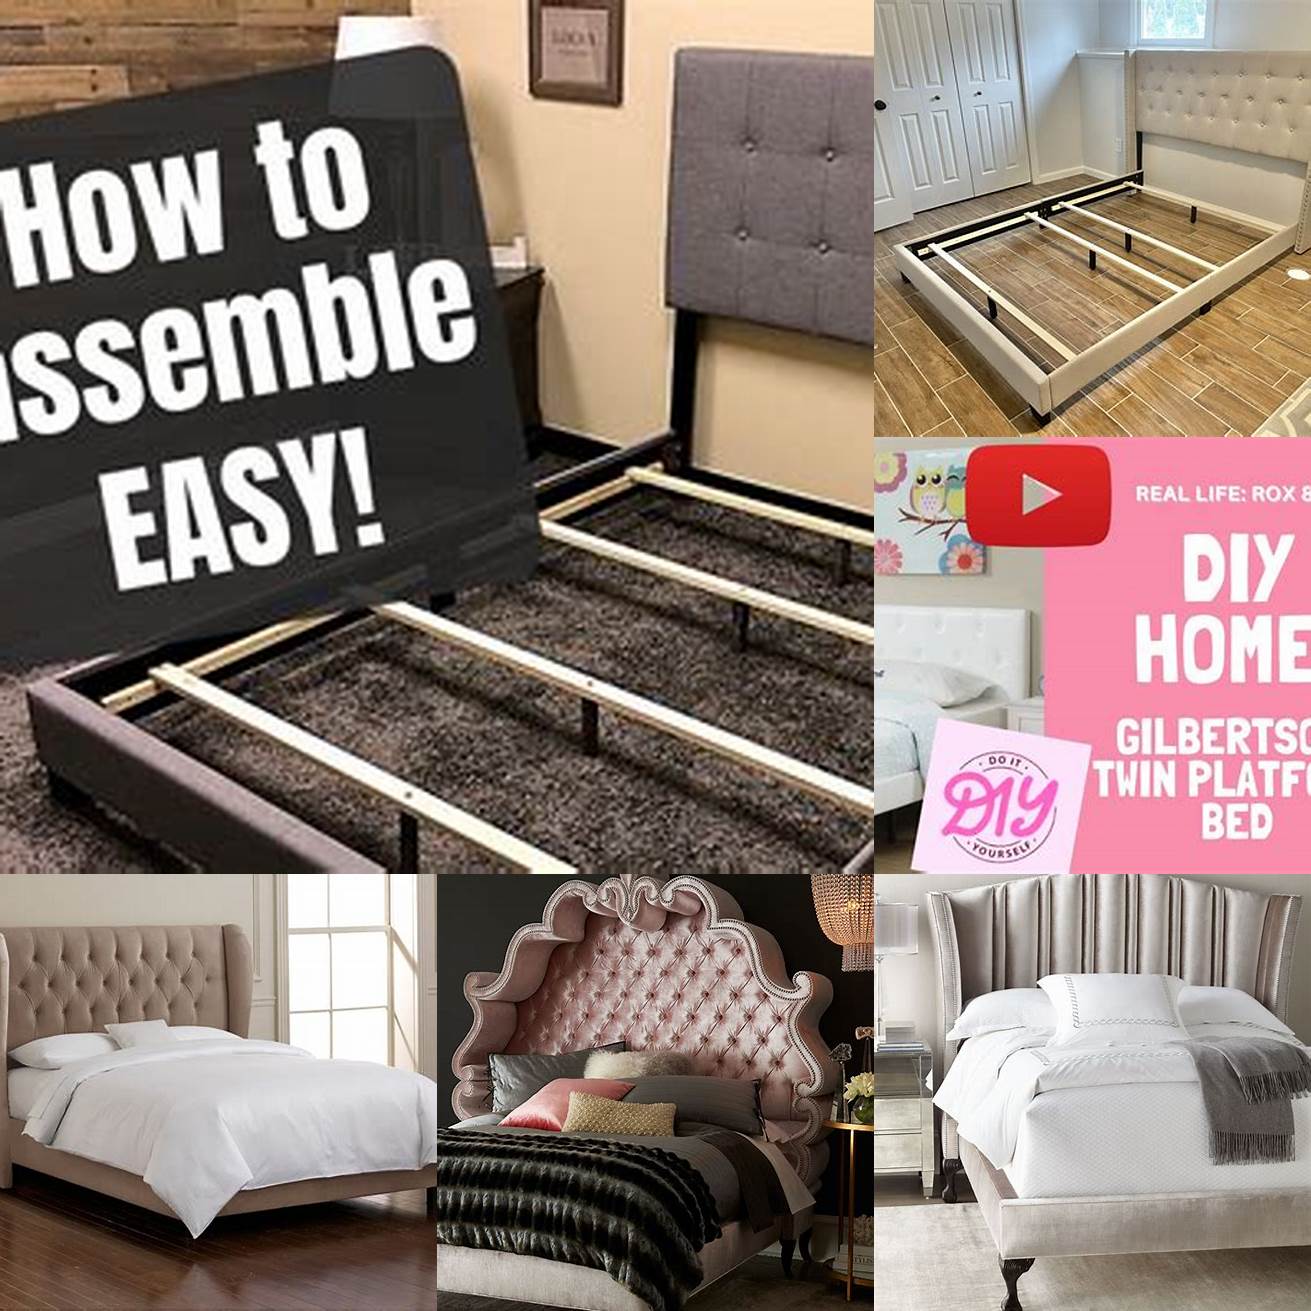 Assembly Tufted beds can be challenging to assemble especially if you are doing it alone It may be helpful to have a friend or family member assist you